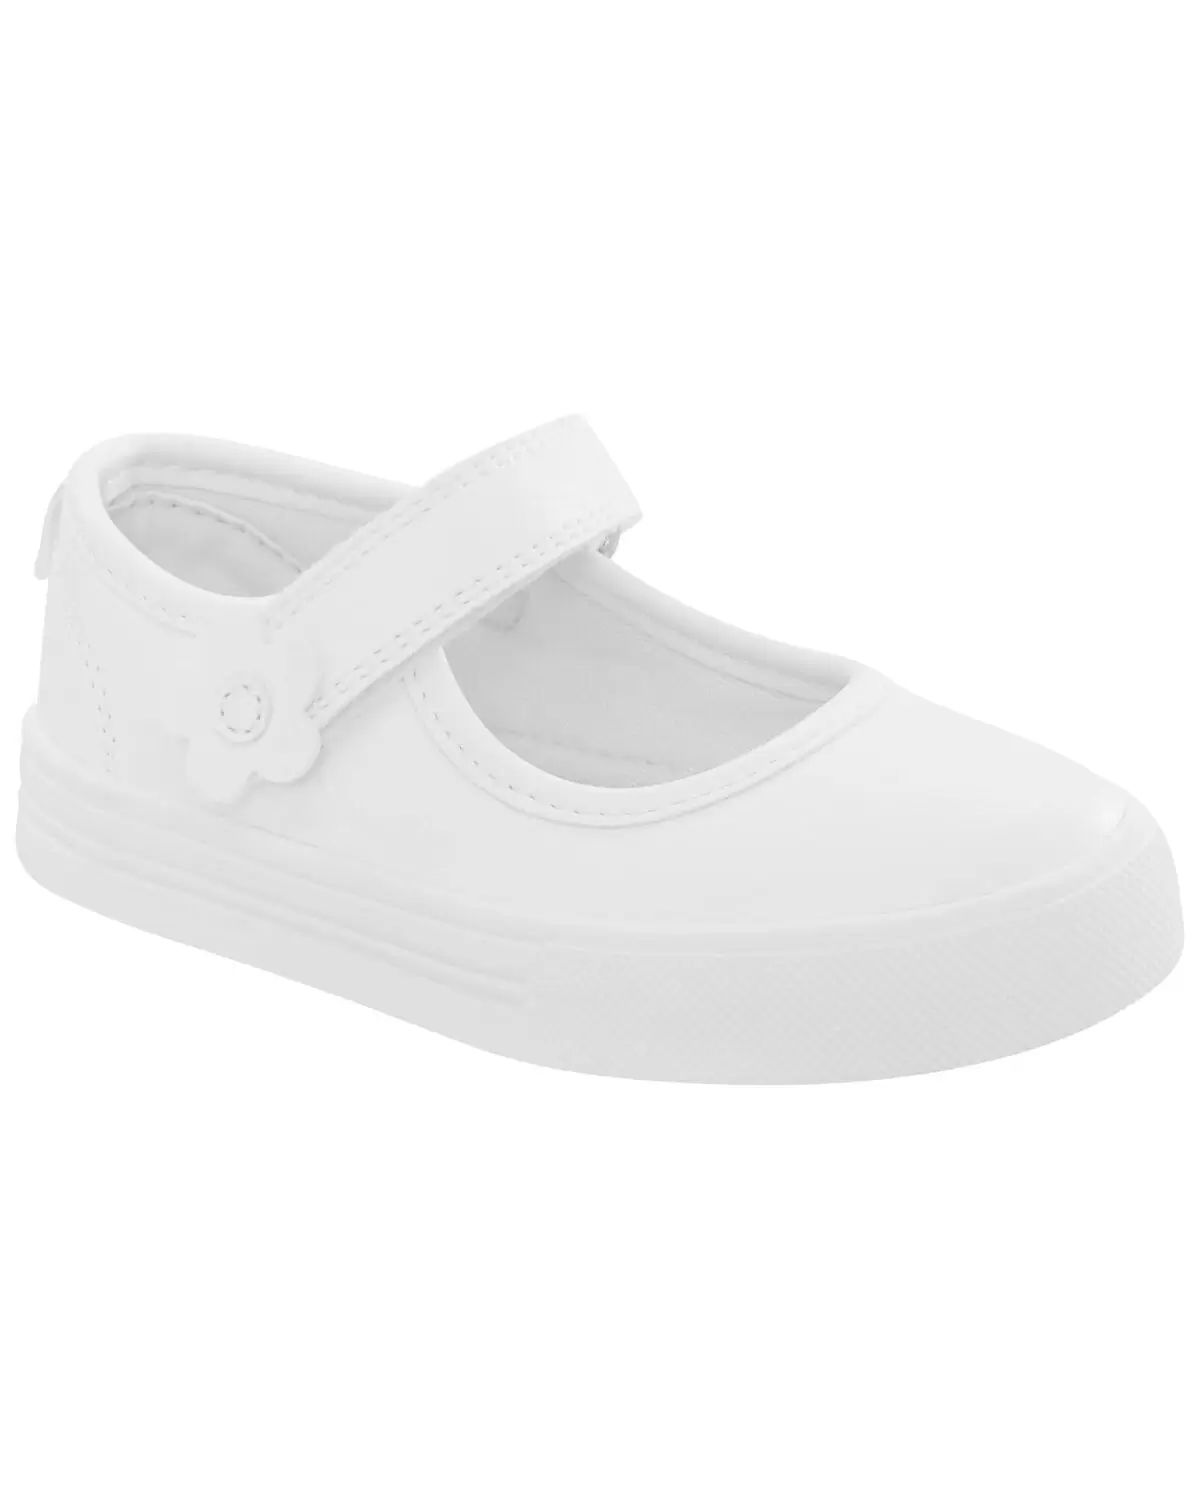 Toddler Play Sneakers | Carter's